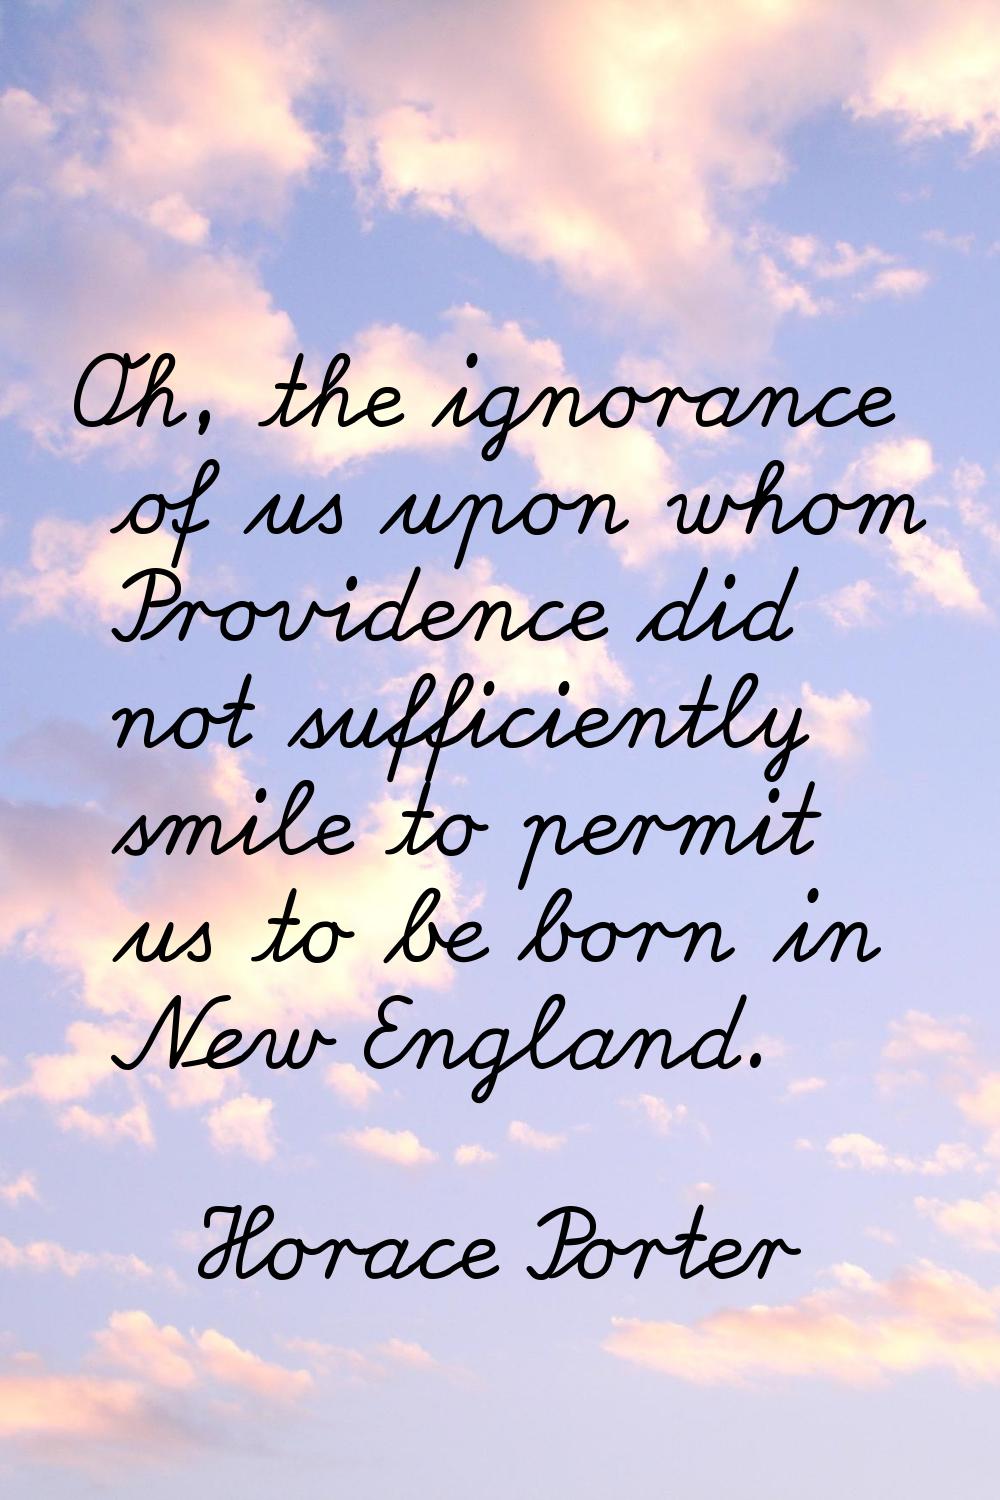 Oh, the ignorance of us upon whom Providence did not sufficiently smile to permit us to be born in 